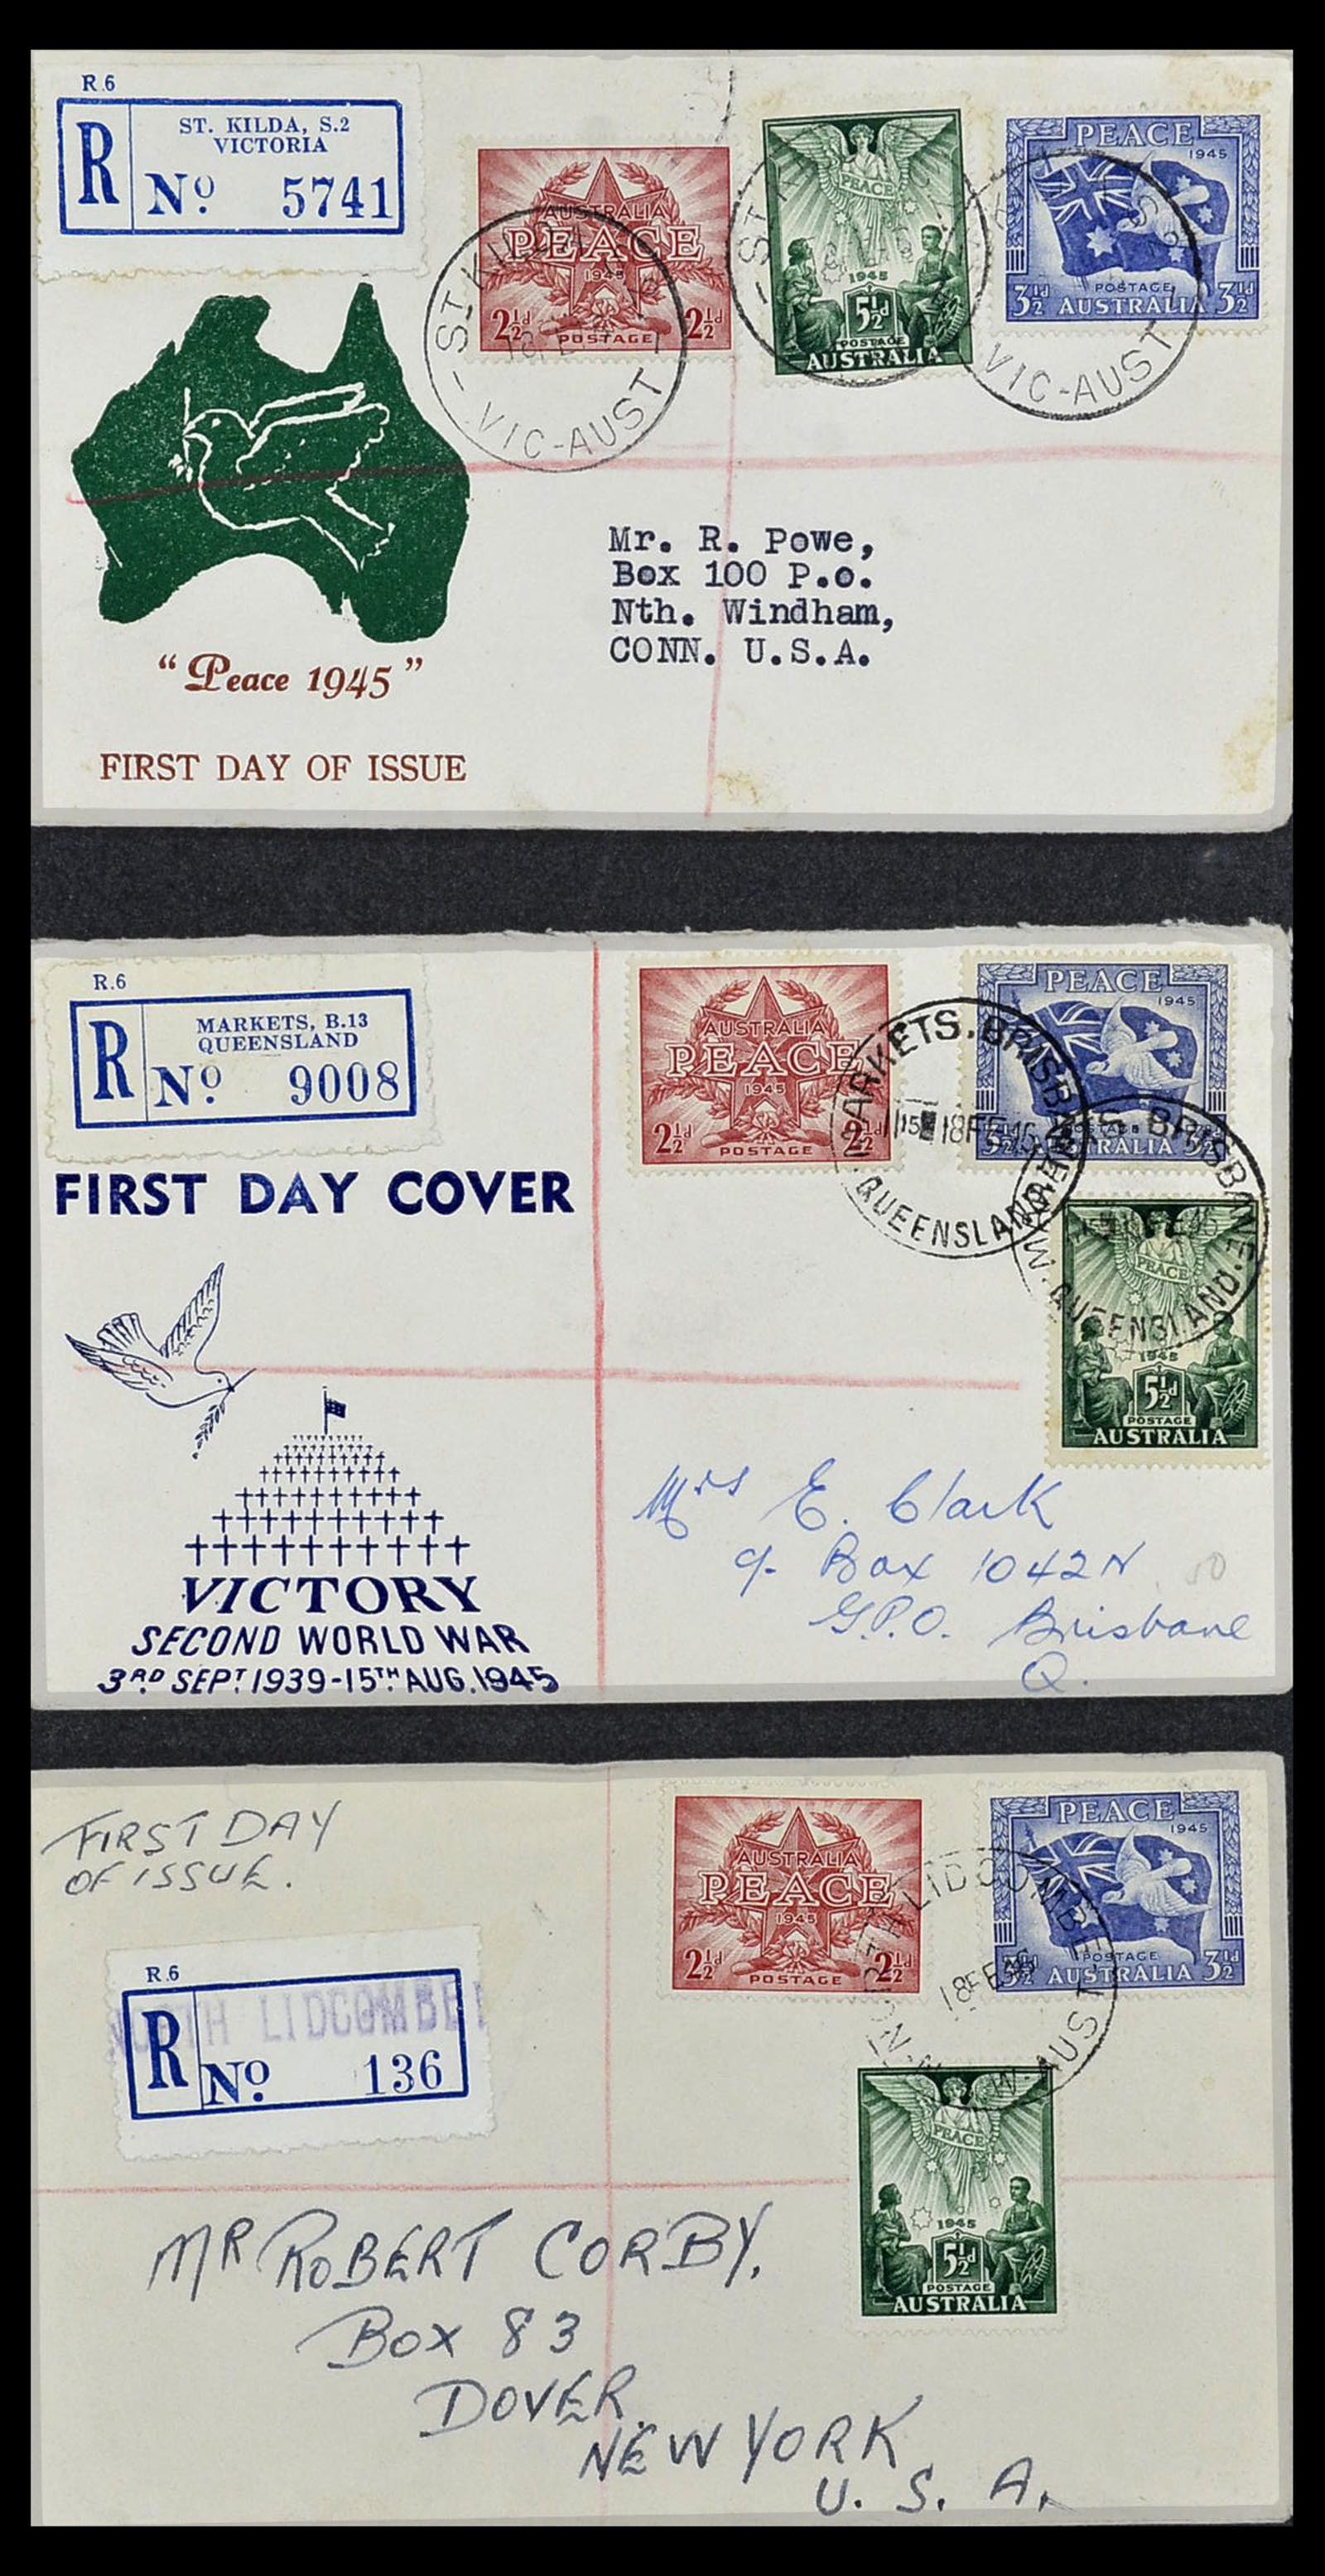 34118 049 - Stamp collection 34118 Australia FDC's 1944-1952.